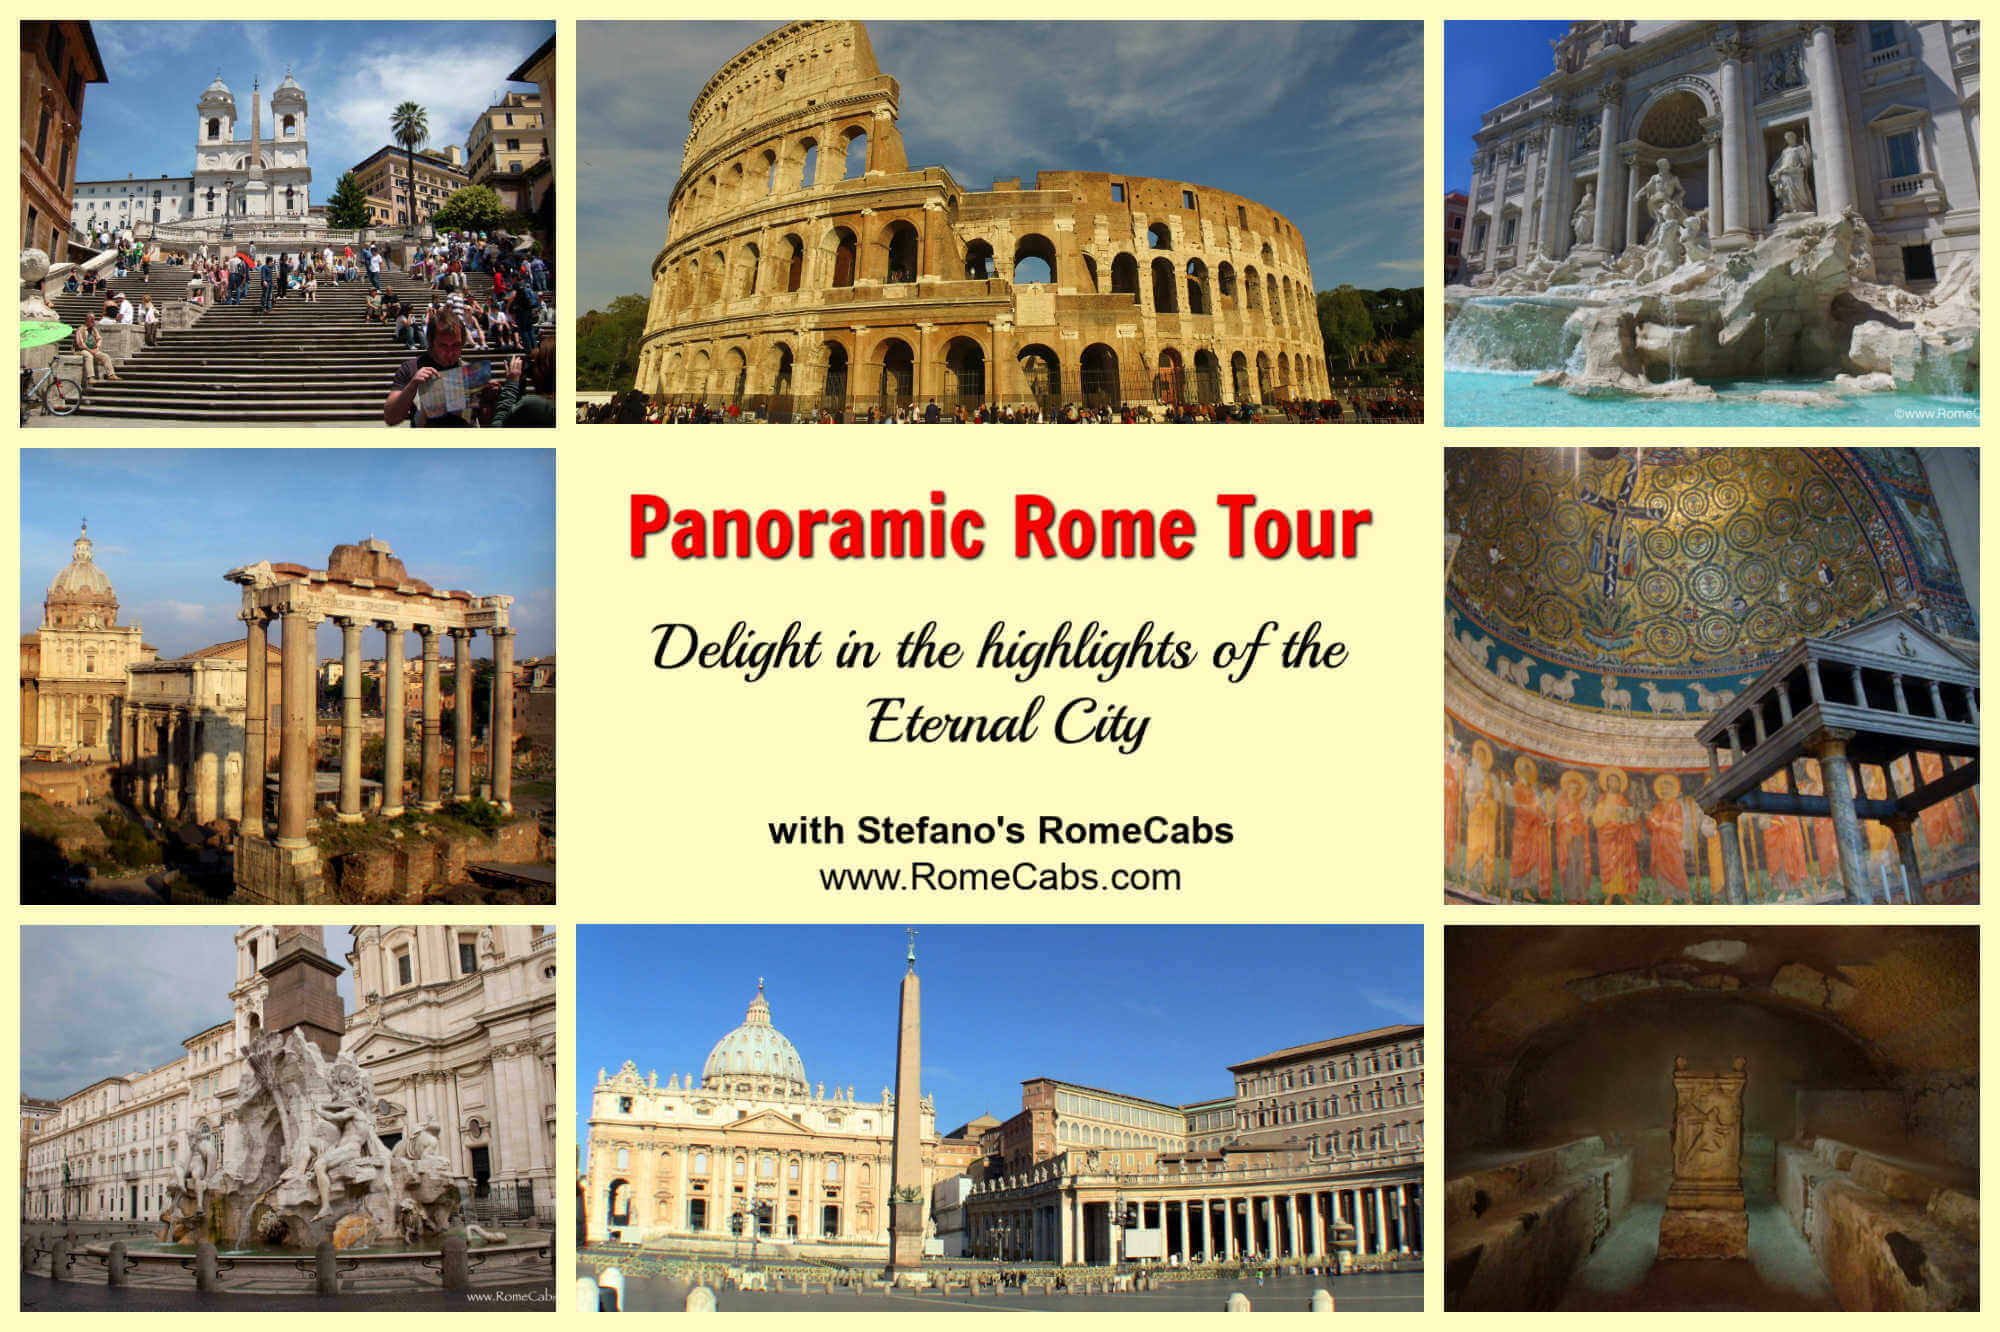 Panoramic Rome Tour for Cruisers Civitavecchia Shore Excurisons Debark Post Cruise tours to Rome in limo RomeCabs